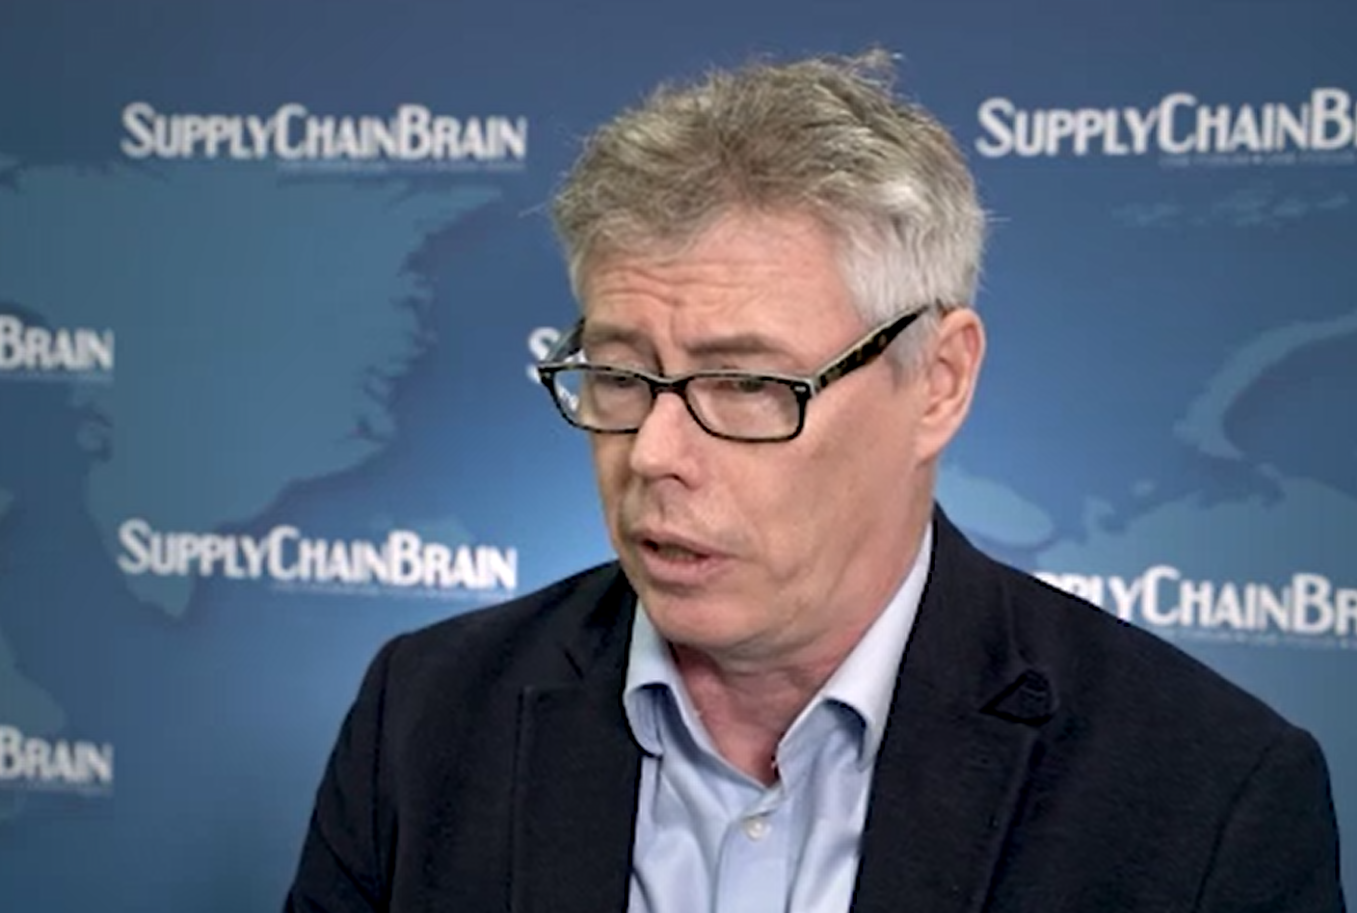 VIDEO: David Hogg Discusses Current Parcel Shipping Challenges with SupplyChainBrain at MODEX 2020